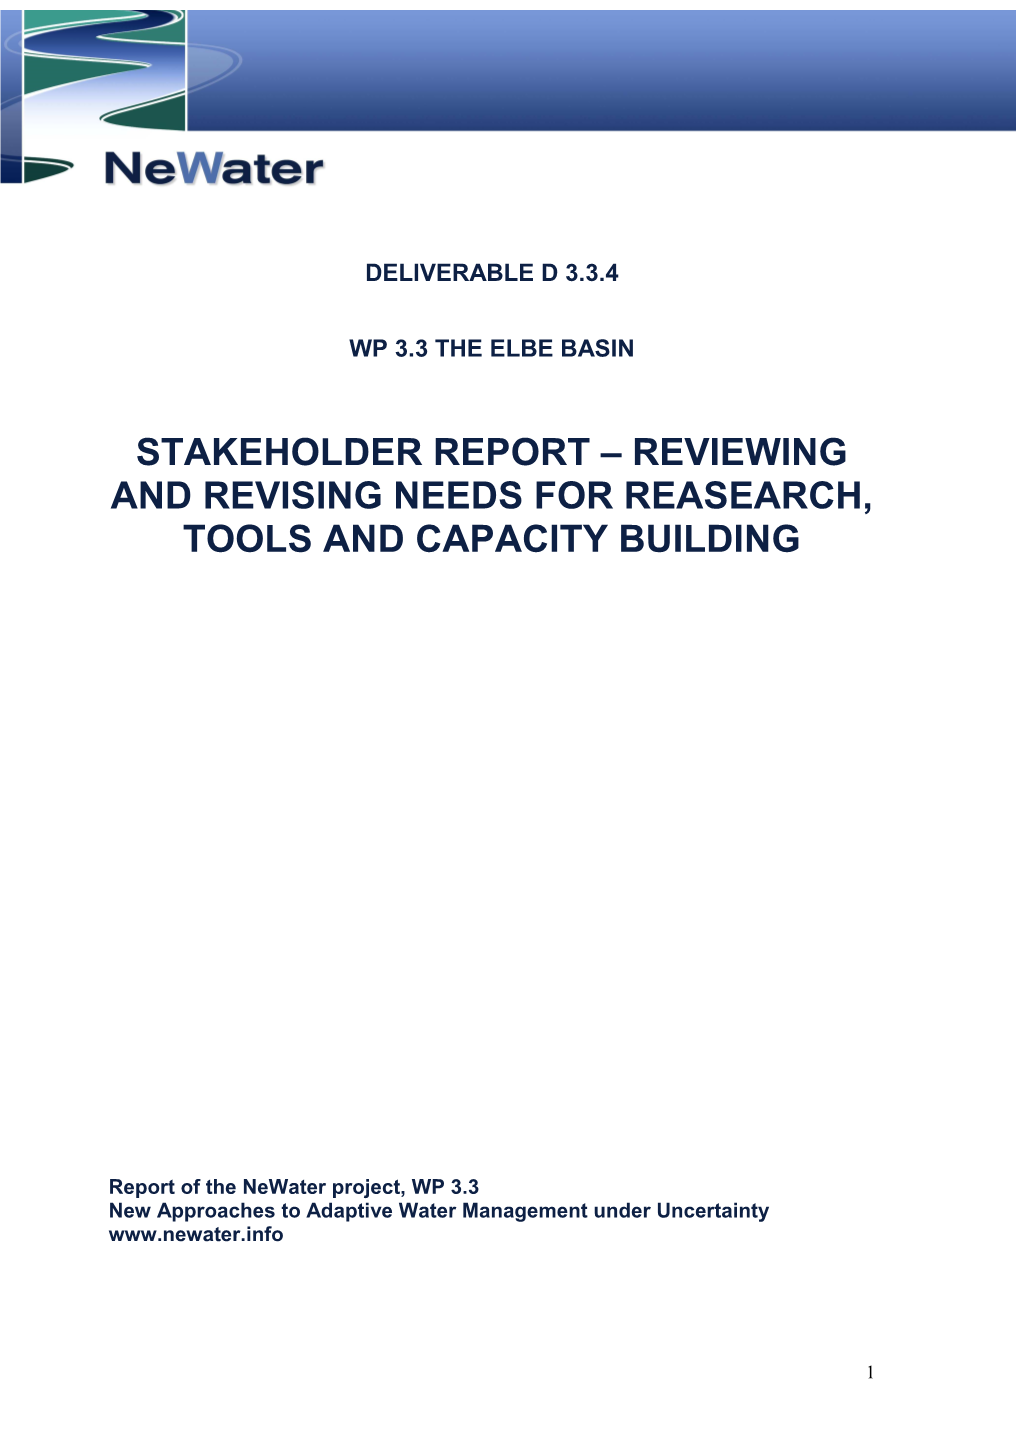 Stakeholder Report – Reviewing and Revising Needs for Reasearch, Tools and Capacity Building